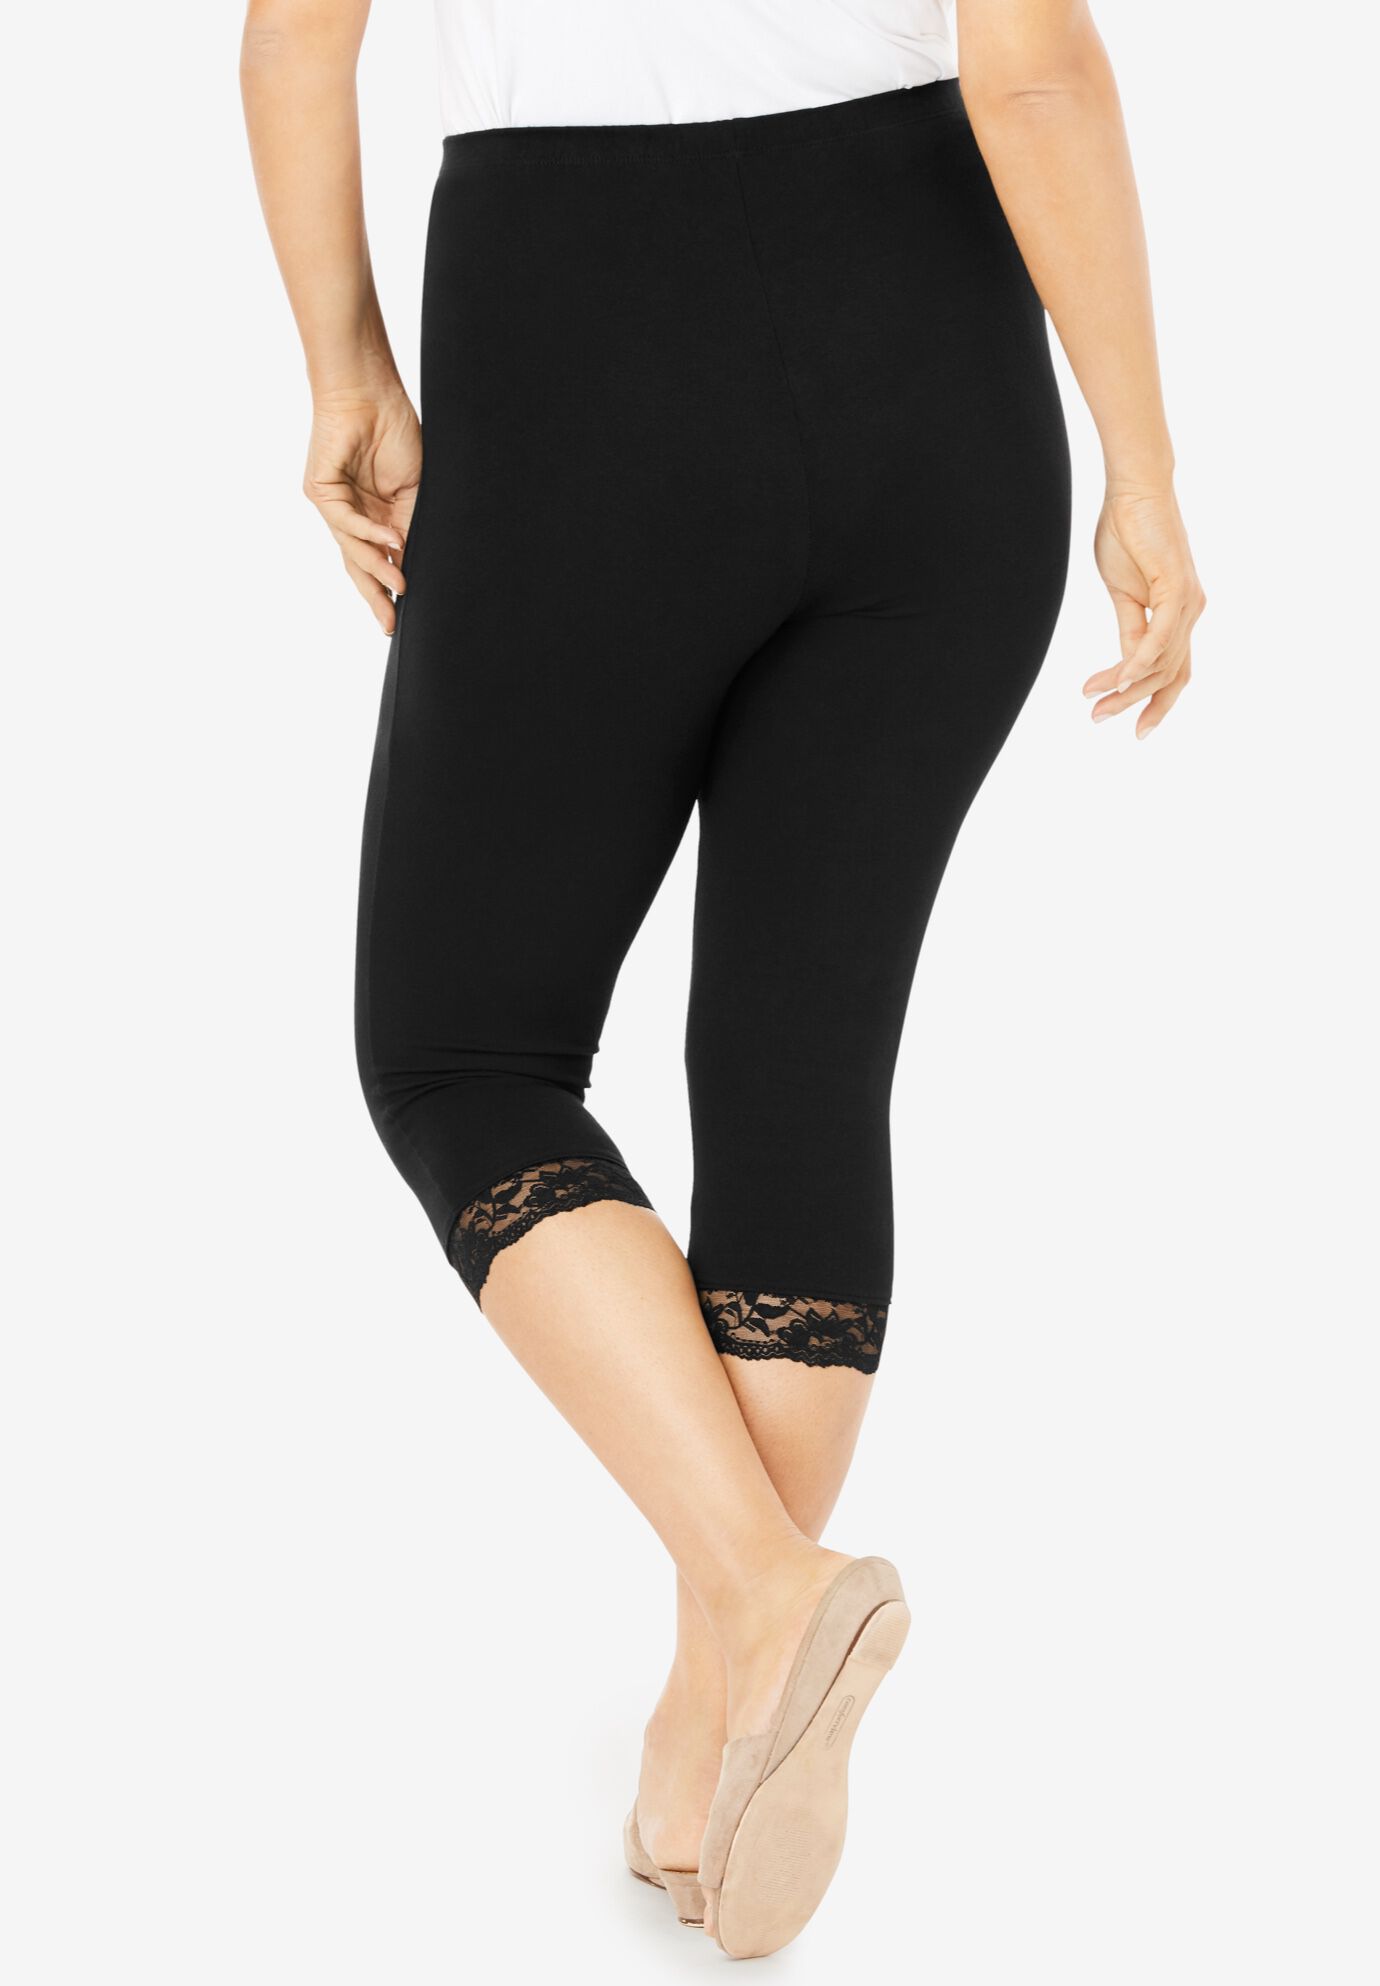 Merry Style Girls 3/4 Leggings with Lace MS10-228